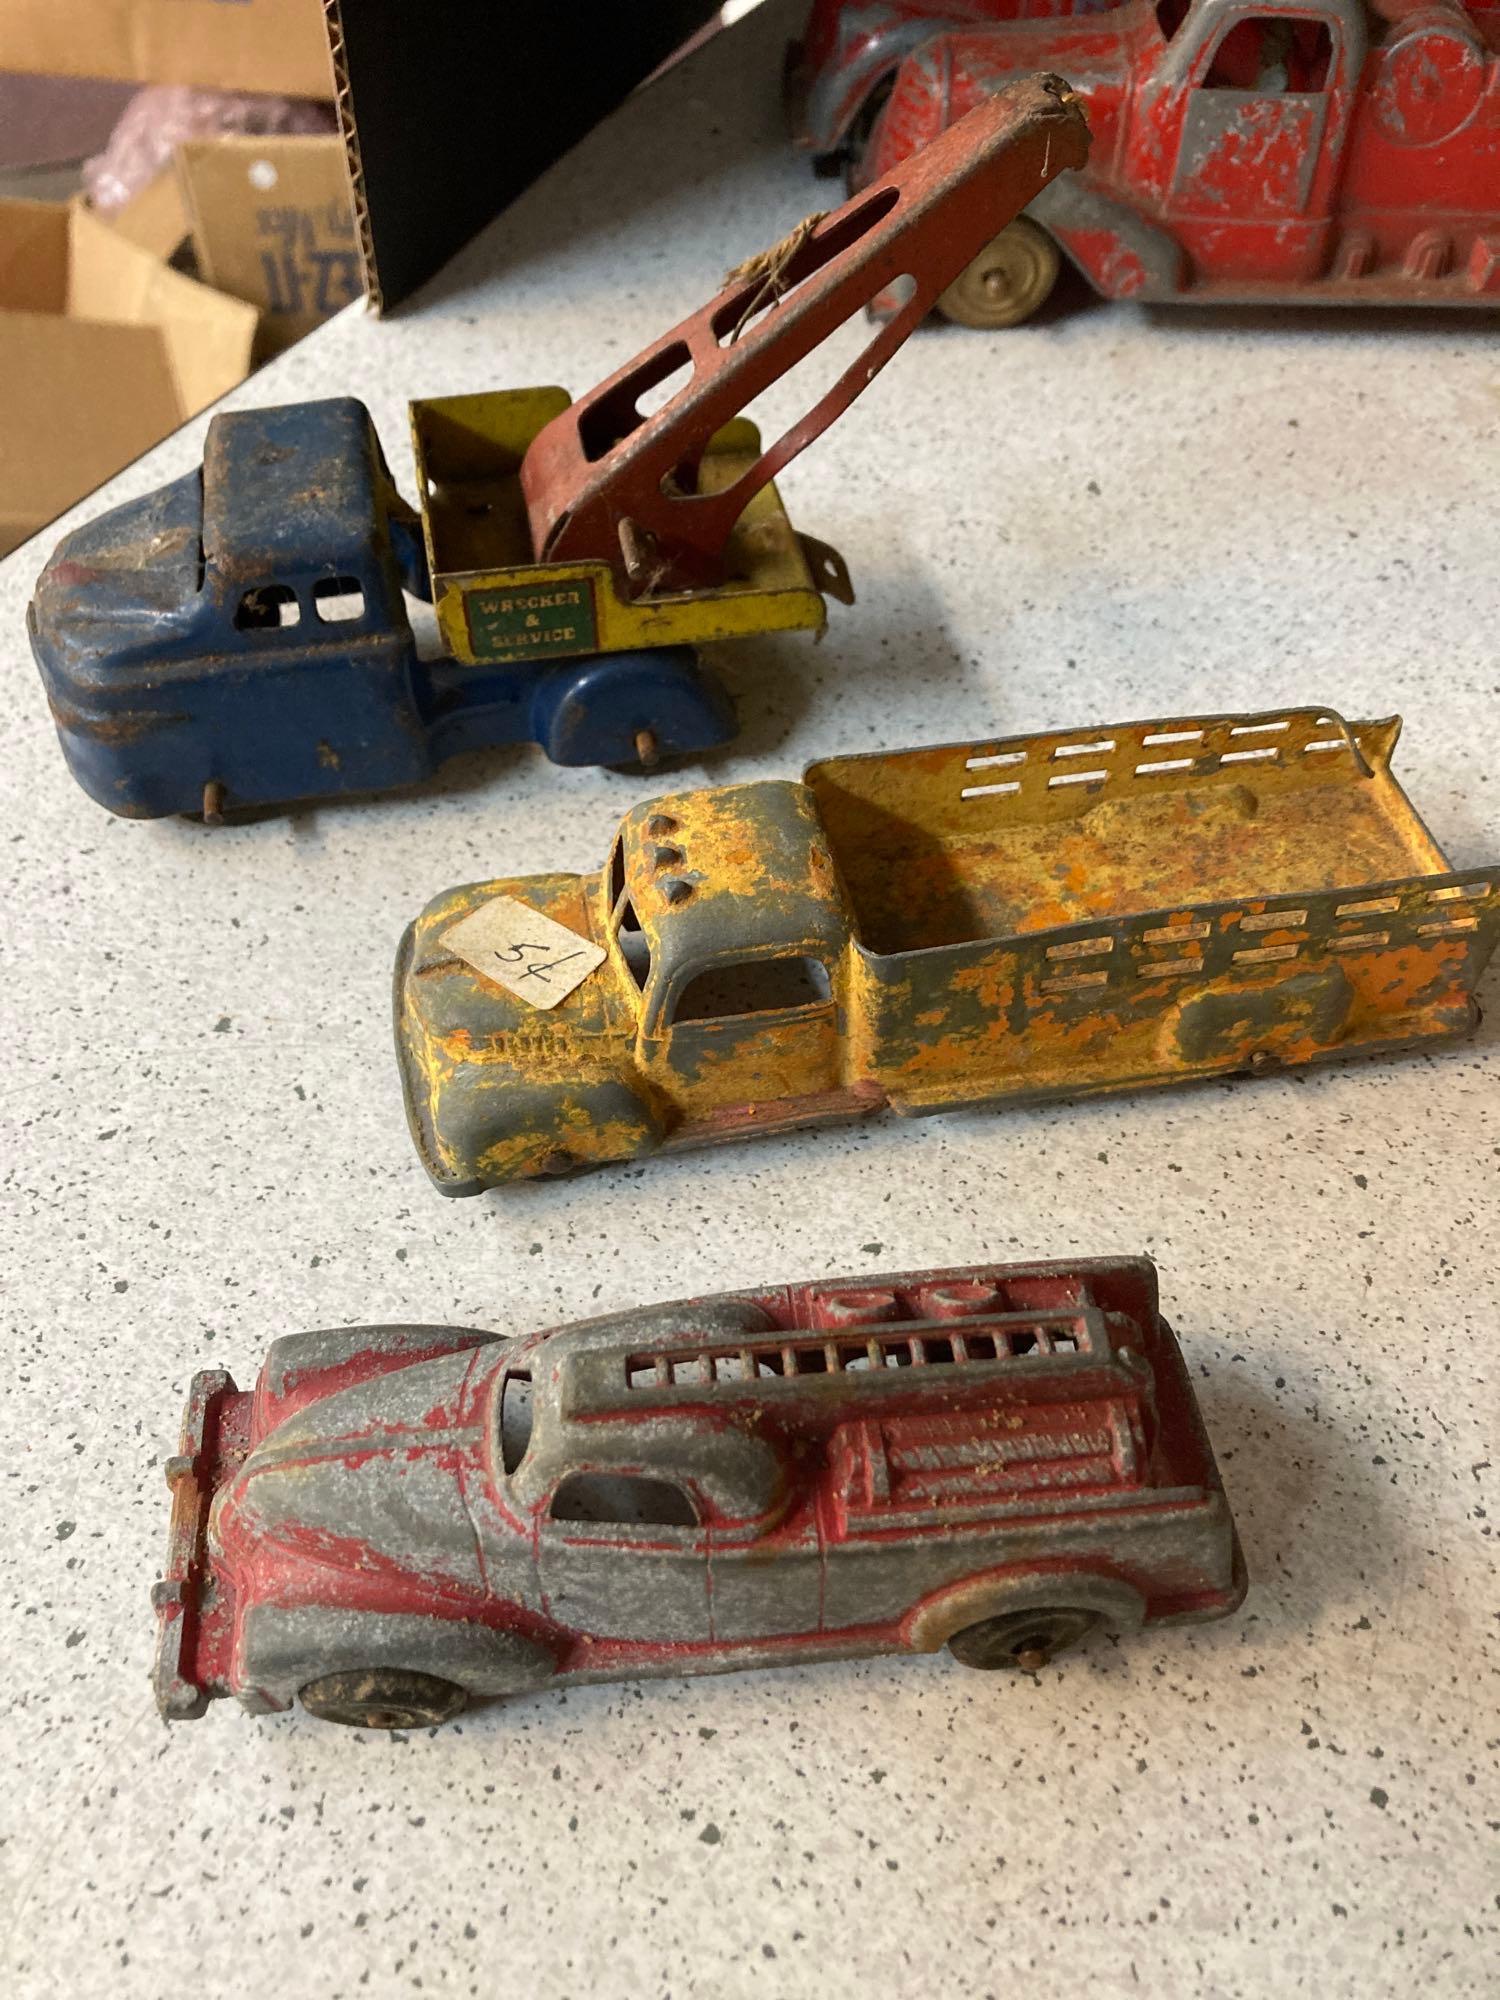 Metal masters trucks, international tractor, other diecast, and Saunders race car